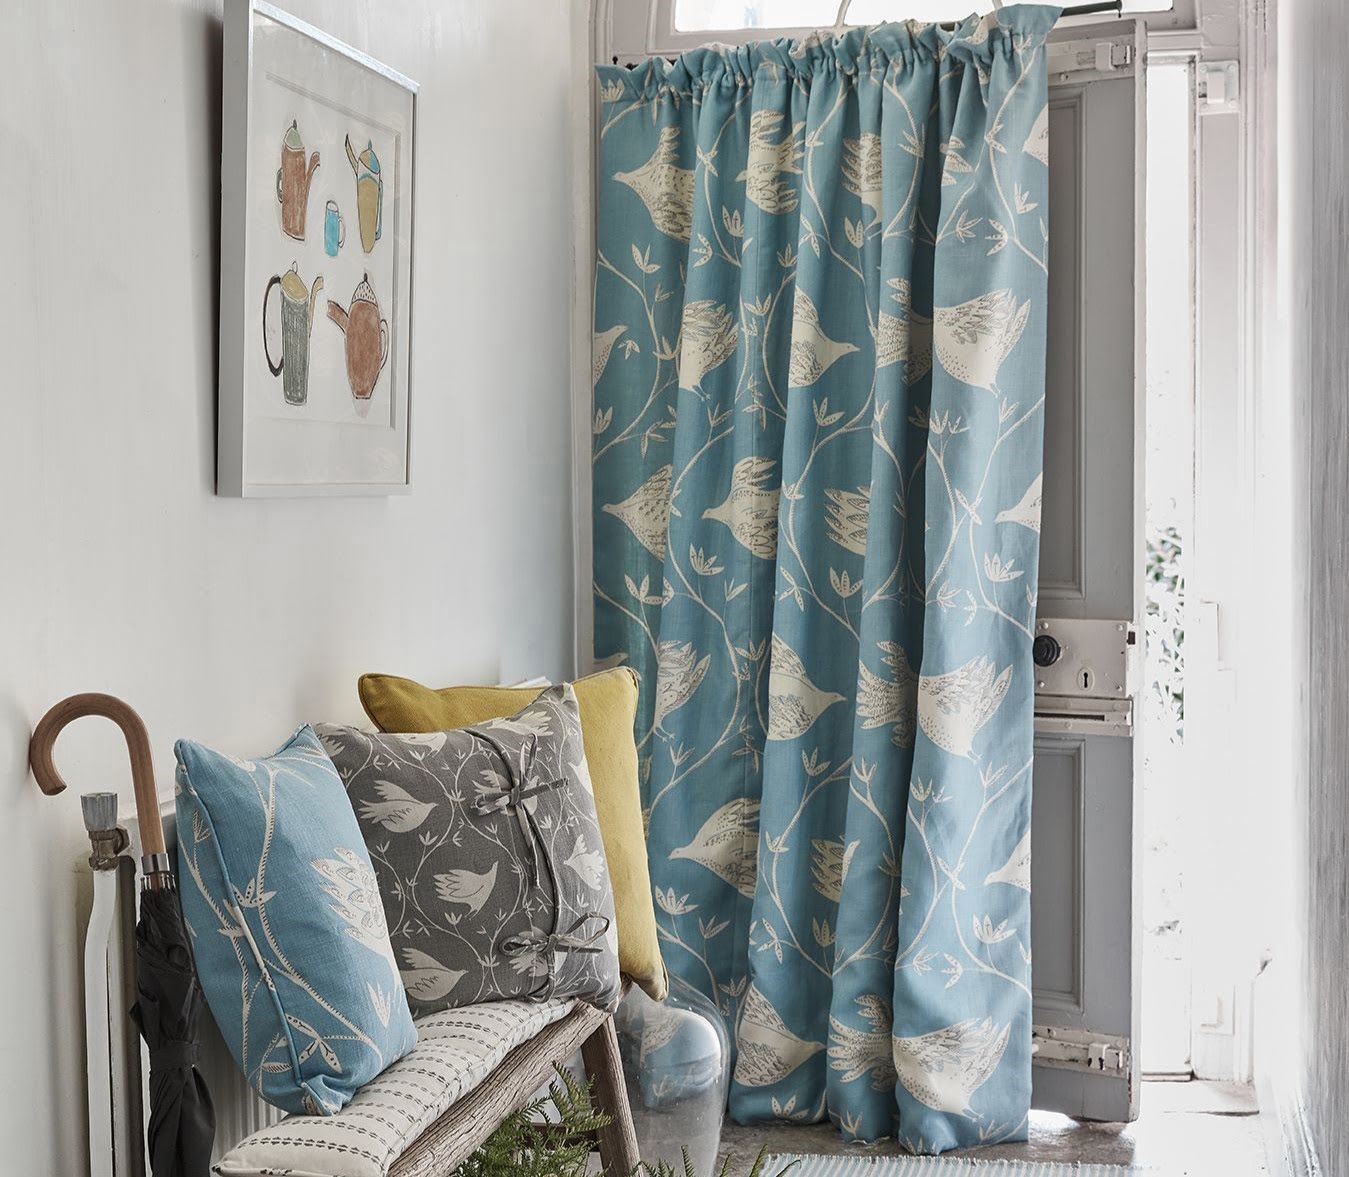 How To Make Doorway Curtains